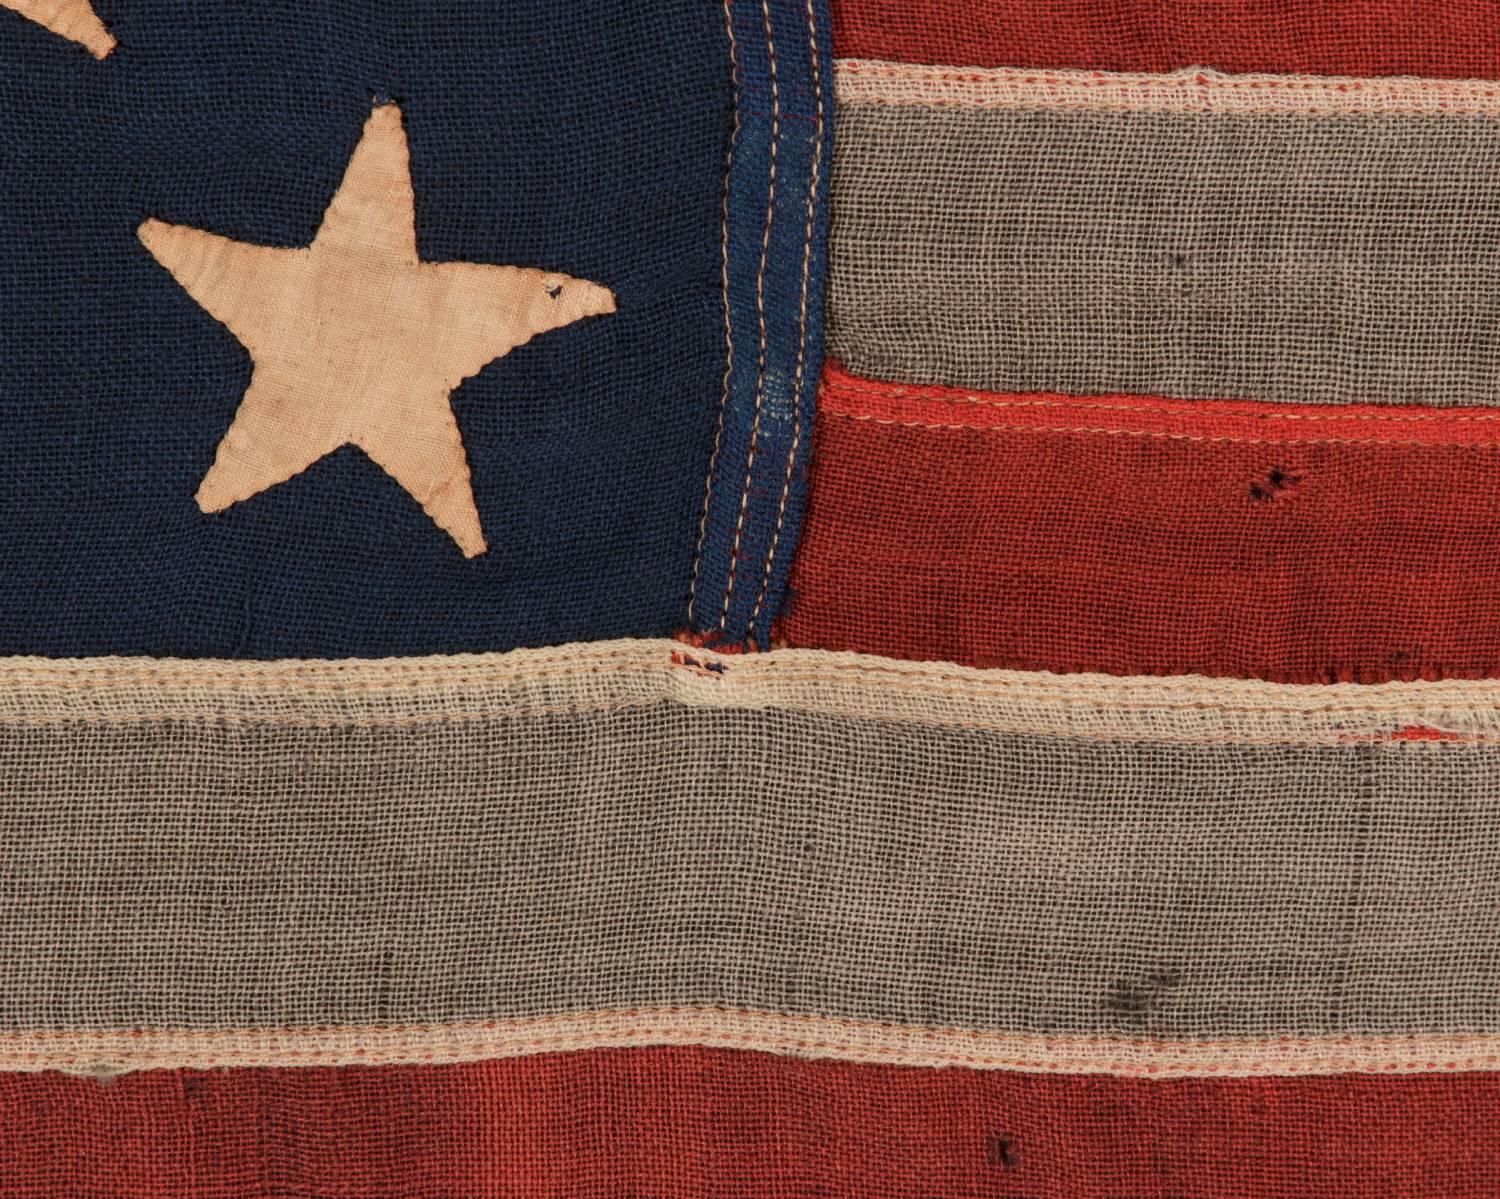 Mid-19th Century 13 Hand-Sewn Stars in a 3-2-3-2-3 Pattern on an Antique American Flag